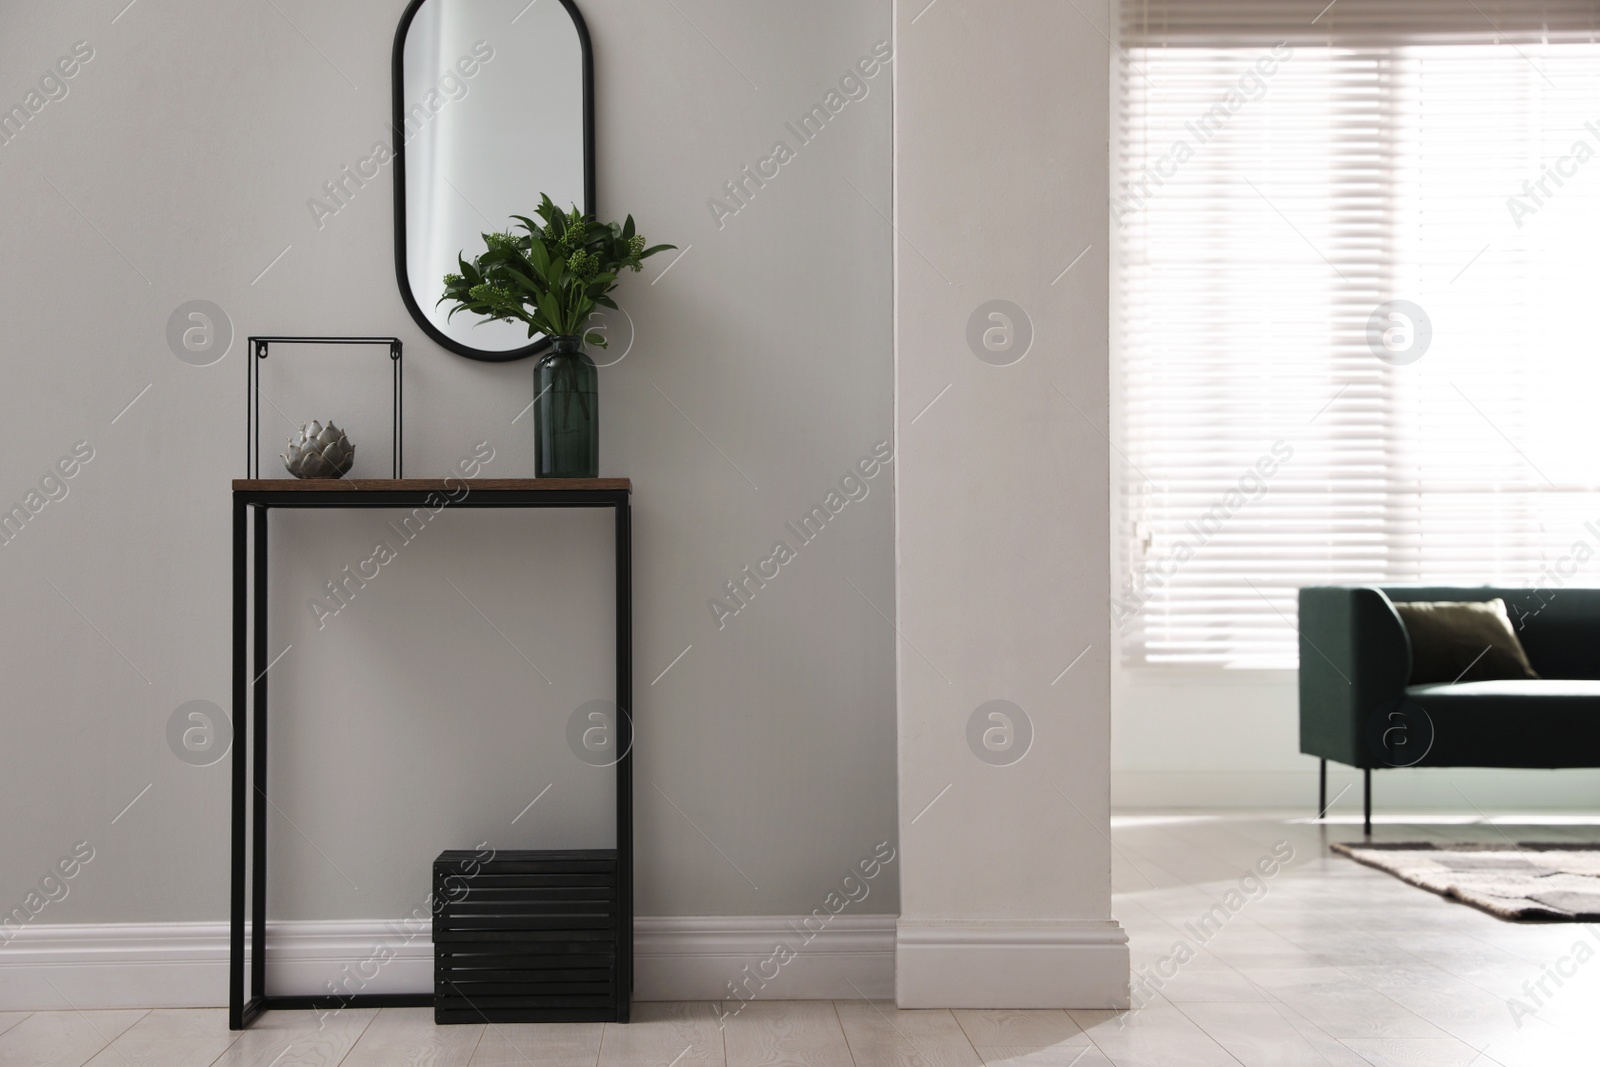 Photo of Console table with decor and mirror on light wall in hallway. Interior design